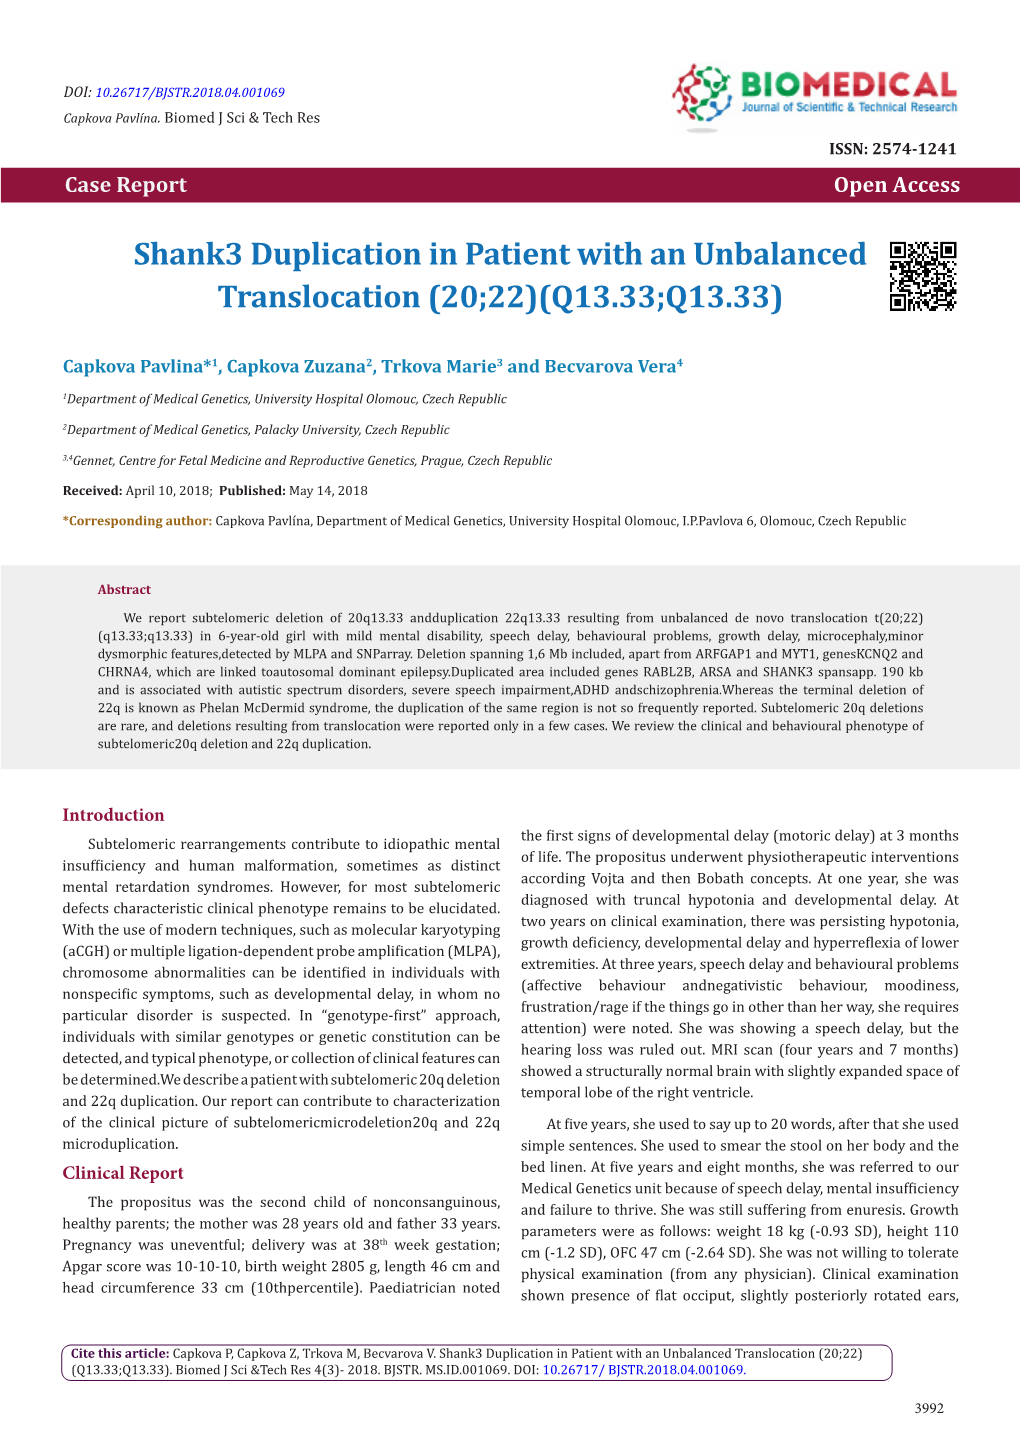 Shank3 Duplication in Patient with an Unbalanced Translocation (20;22)(Q13.33;Q13.33)